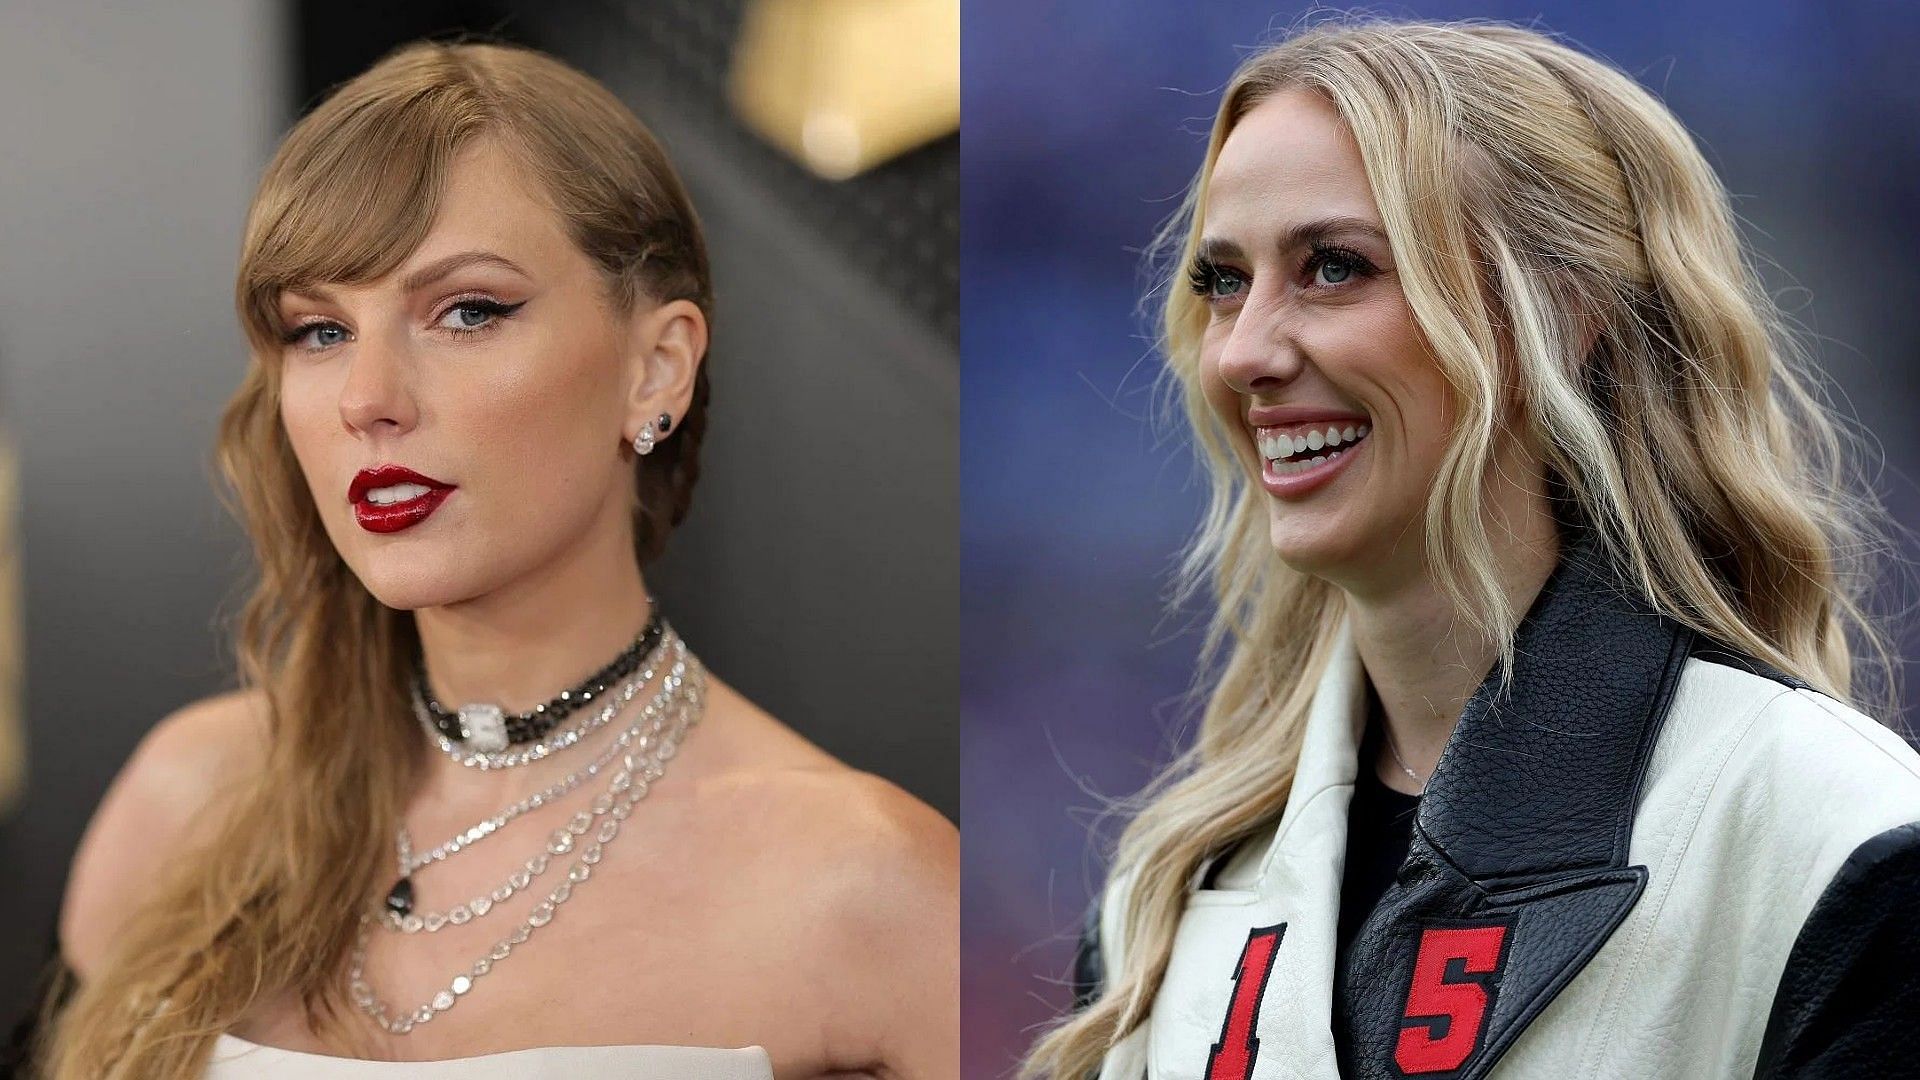 Brittany Mahomes spotted wearing $1595 minidress from Taylor Swift